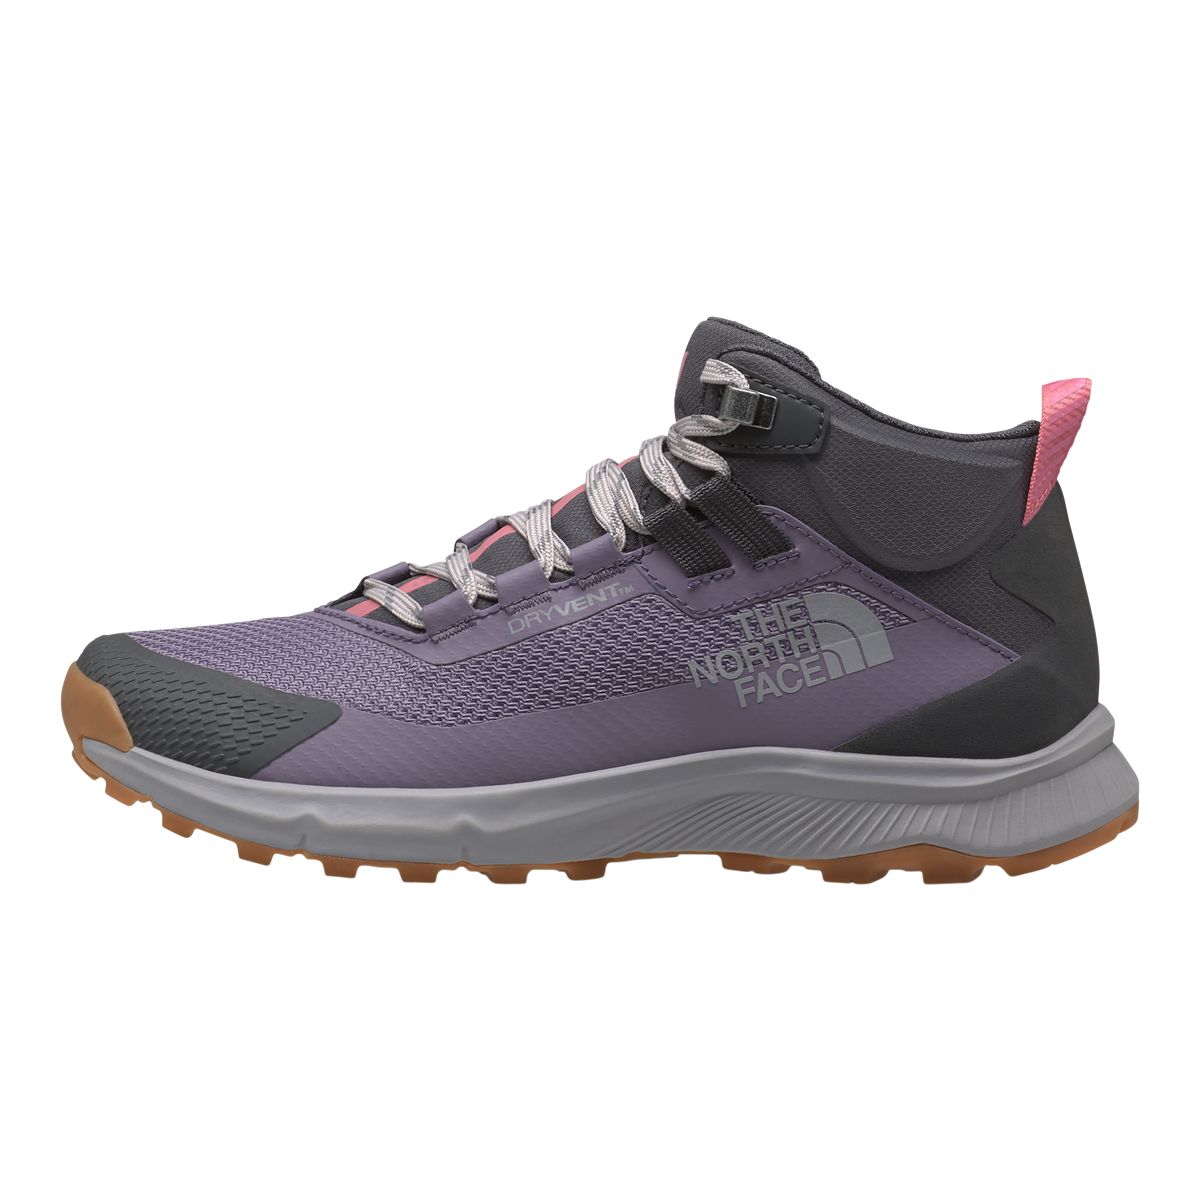 Image of The North Face Women's Cragstone Mid Lightweight Waterproof Hiking Boots